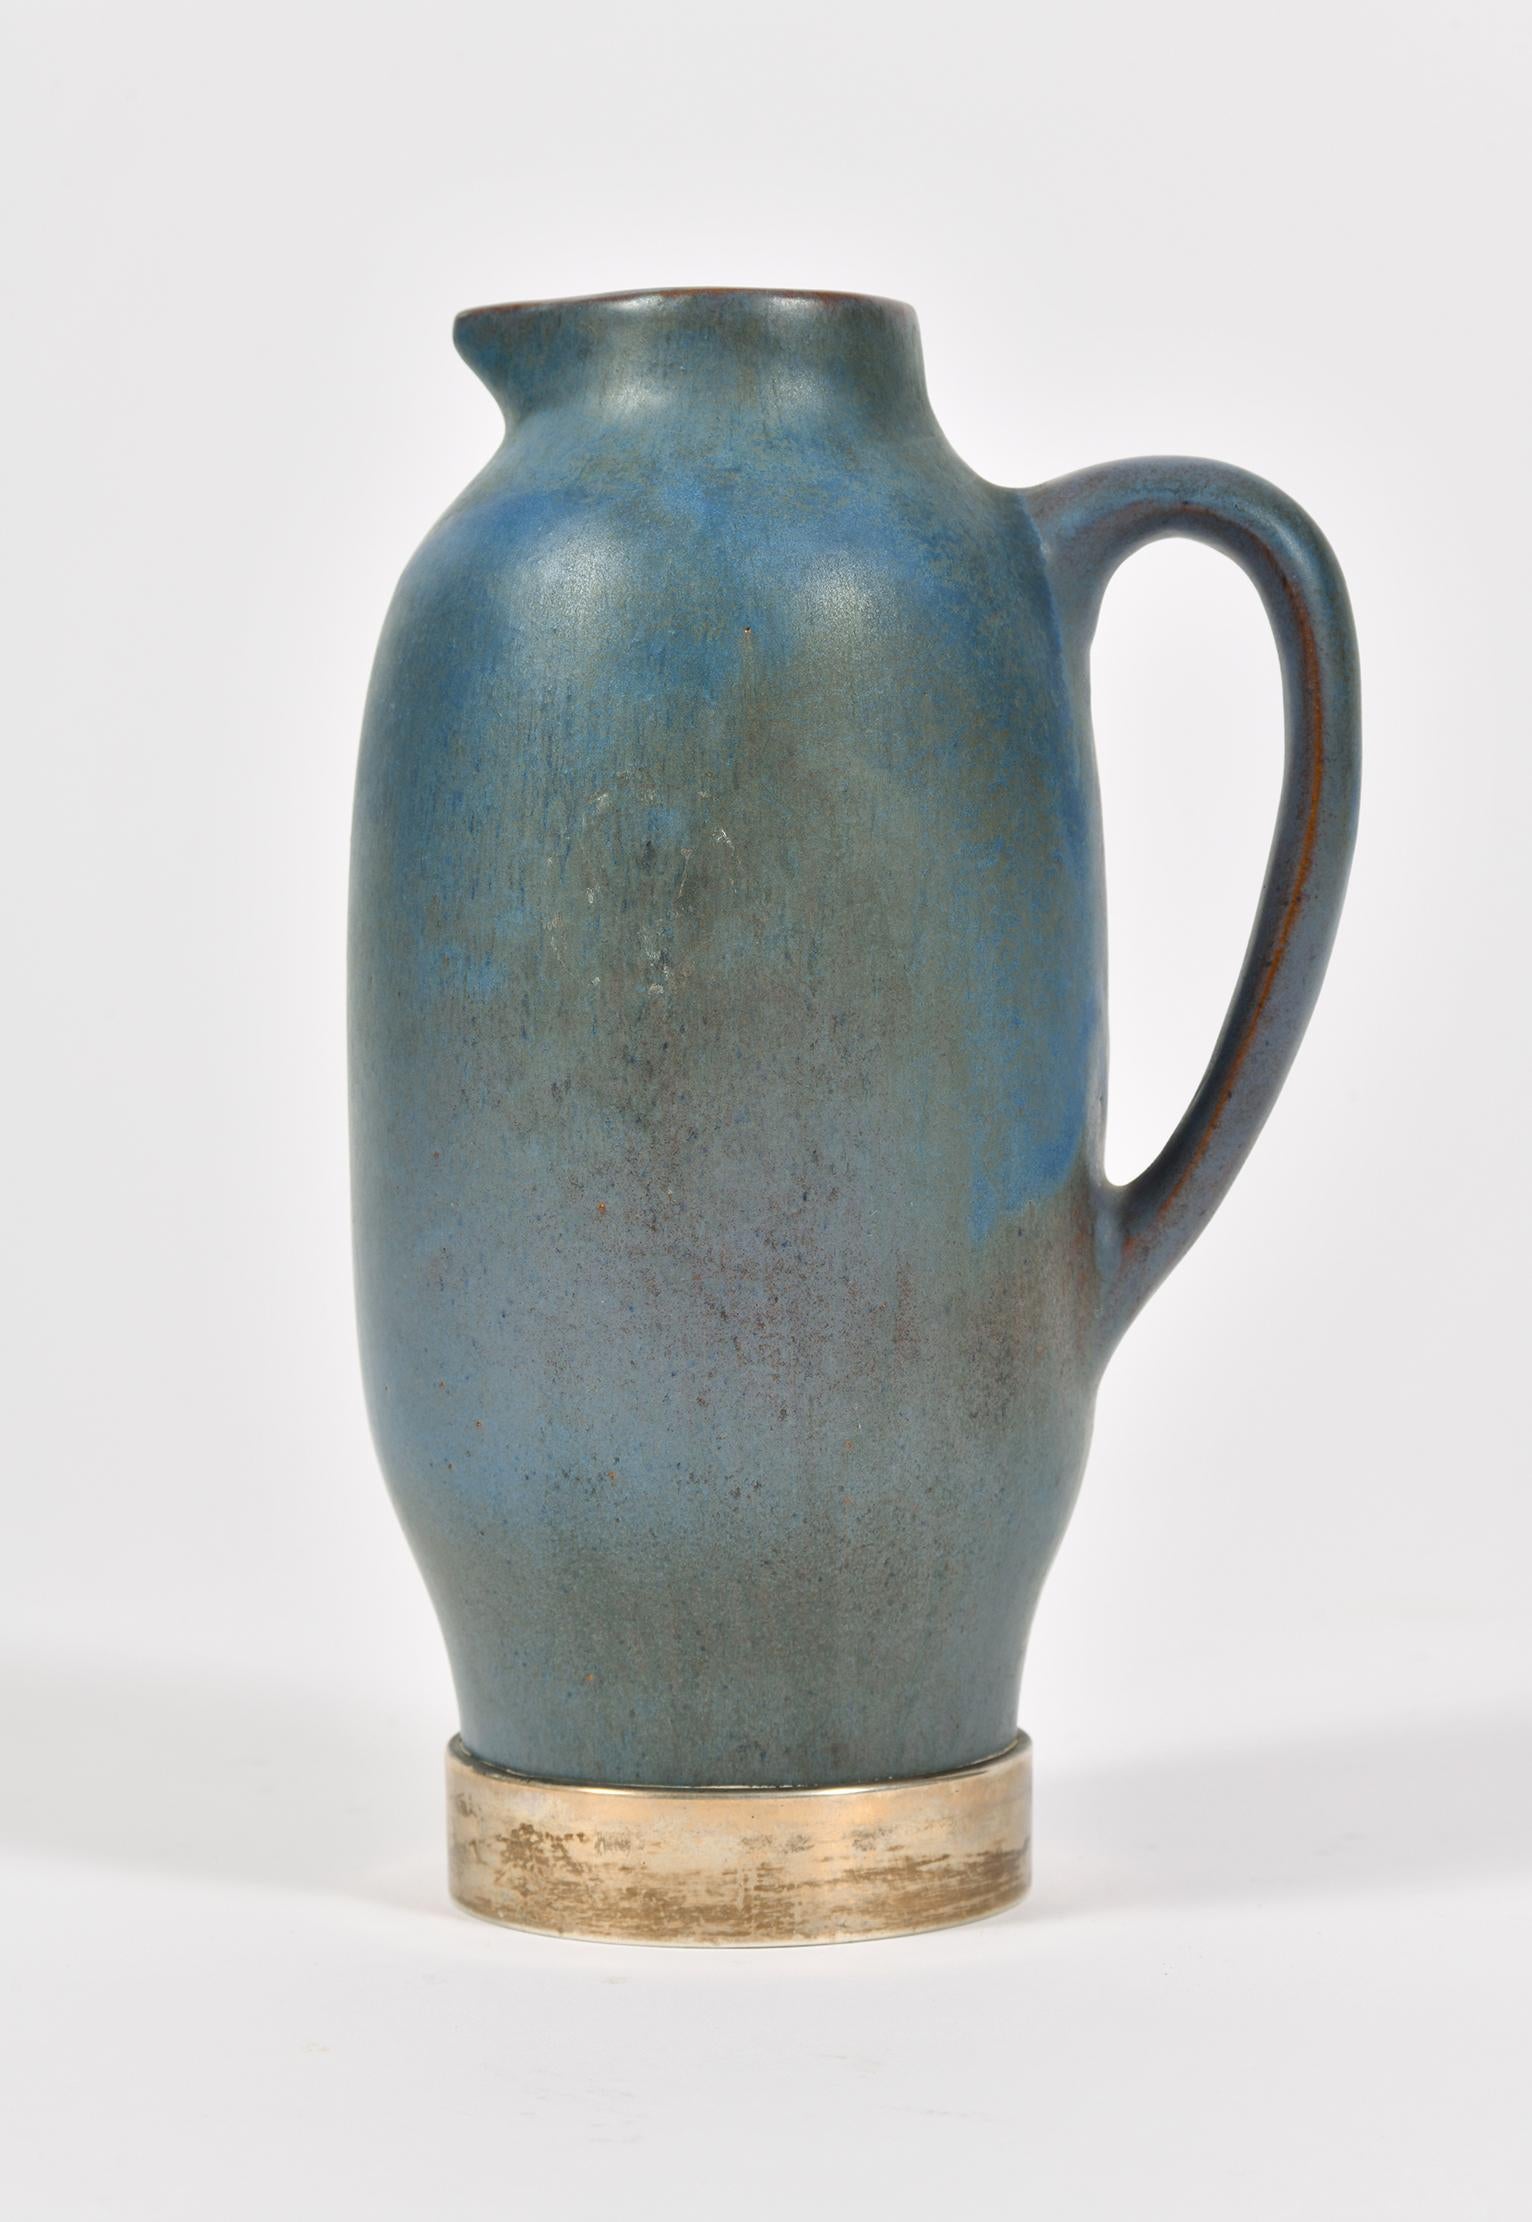 A mottled blue stoneware jug, on a solid silver base.
Bearing two Spanish silver hallmarks: the five-point star silver fineness mark for 915/1000 purity (plata de ley) and the city of Barcelona assay office mark. Also bearing the ceramicist